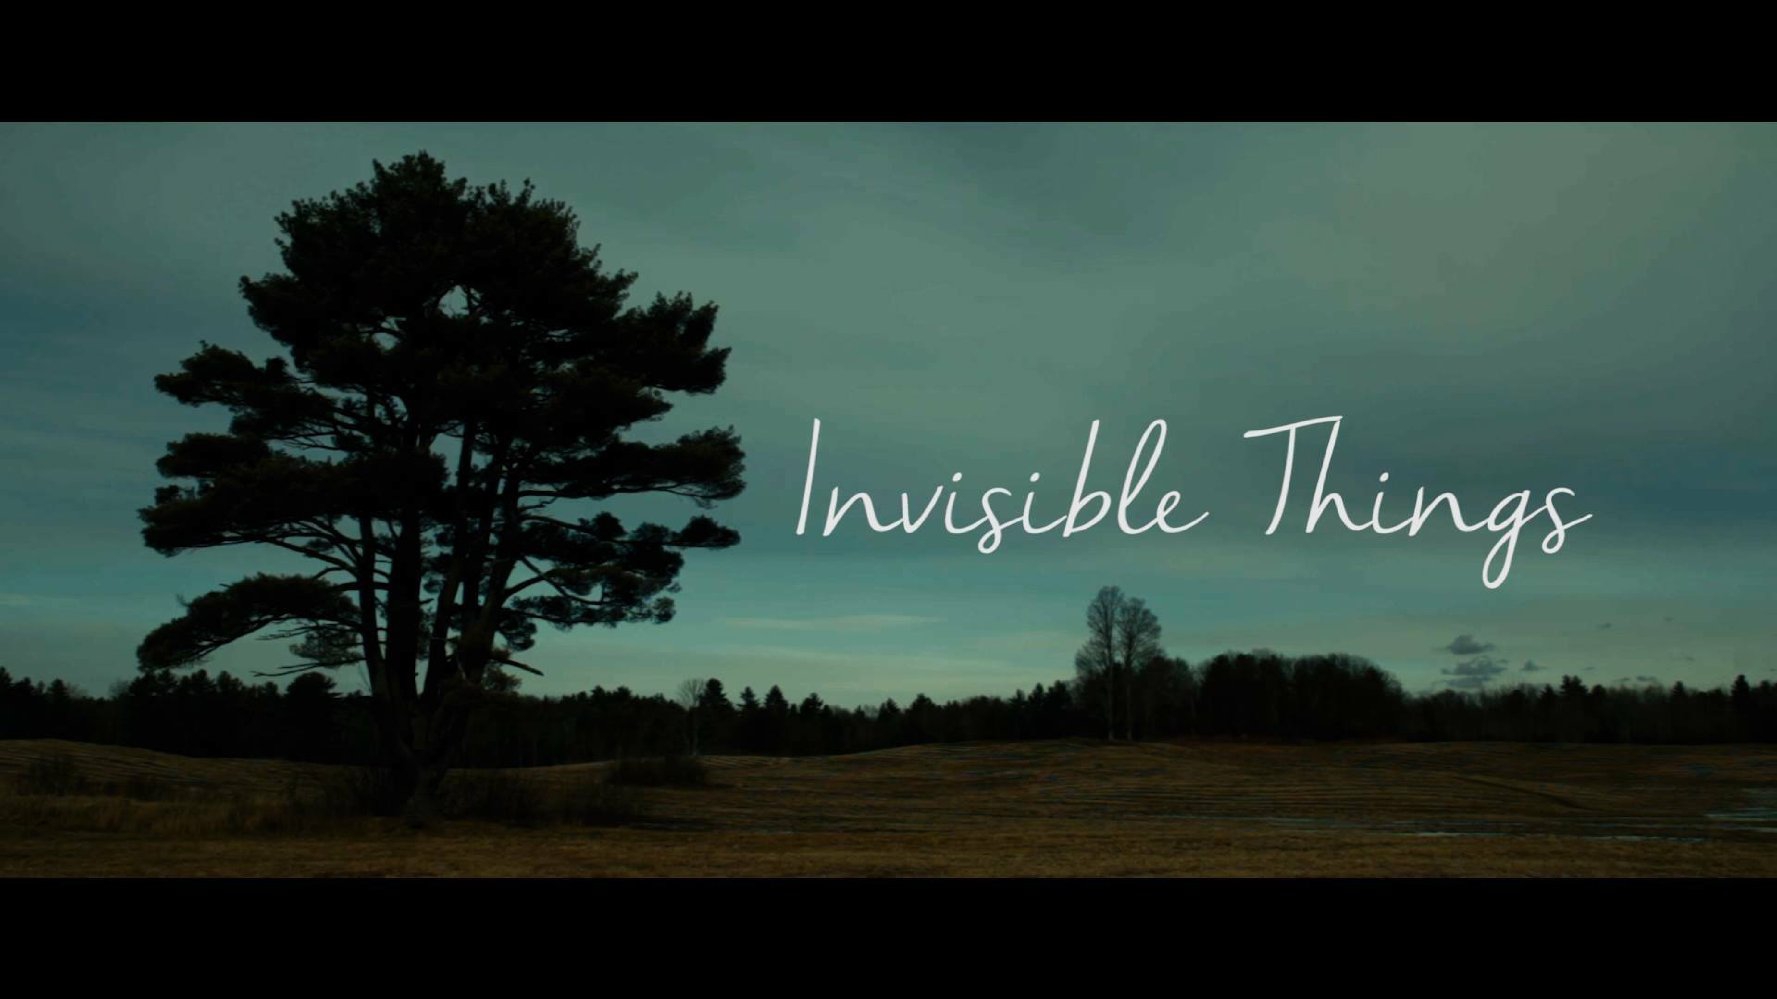  Invisible Things (2017)